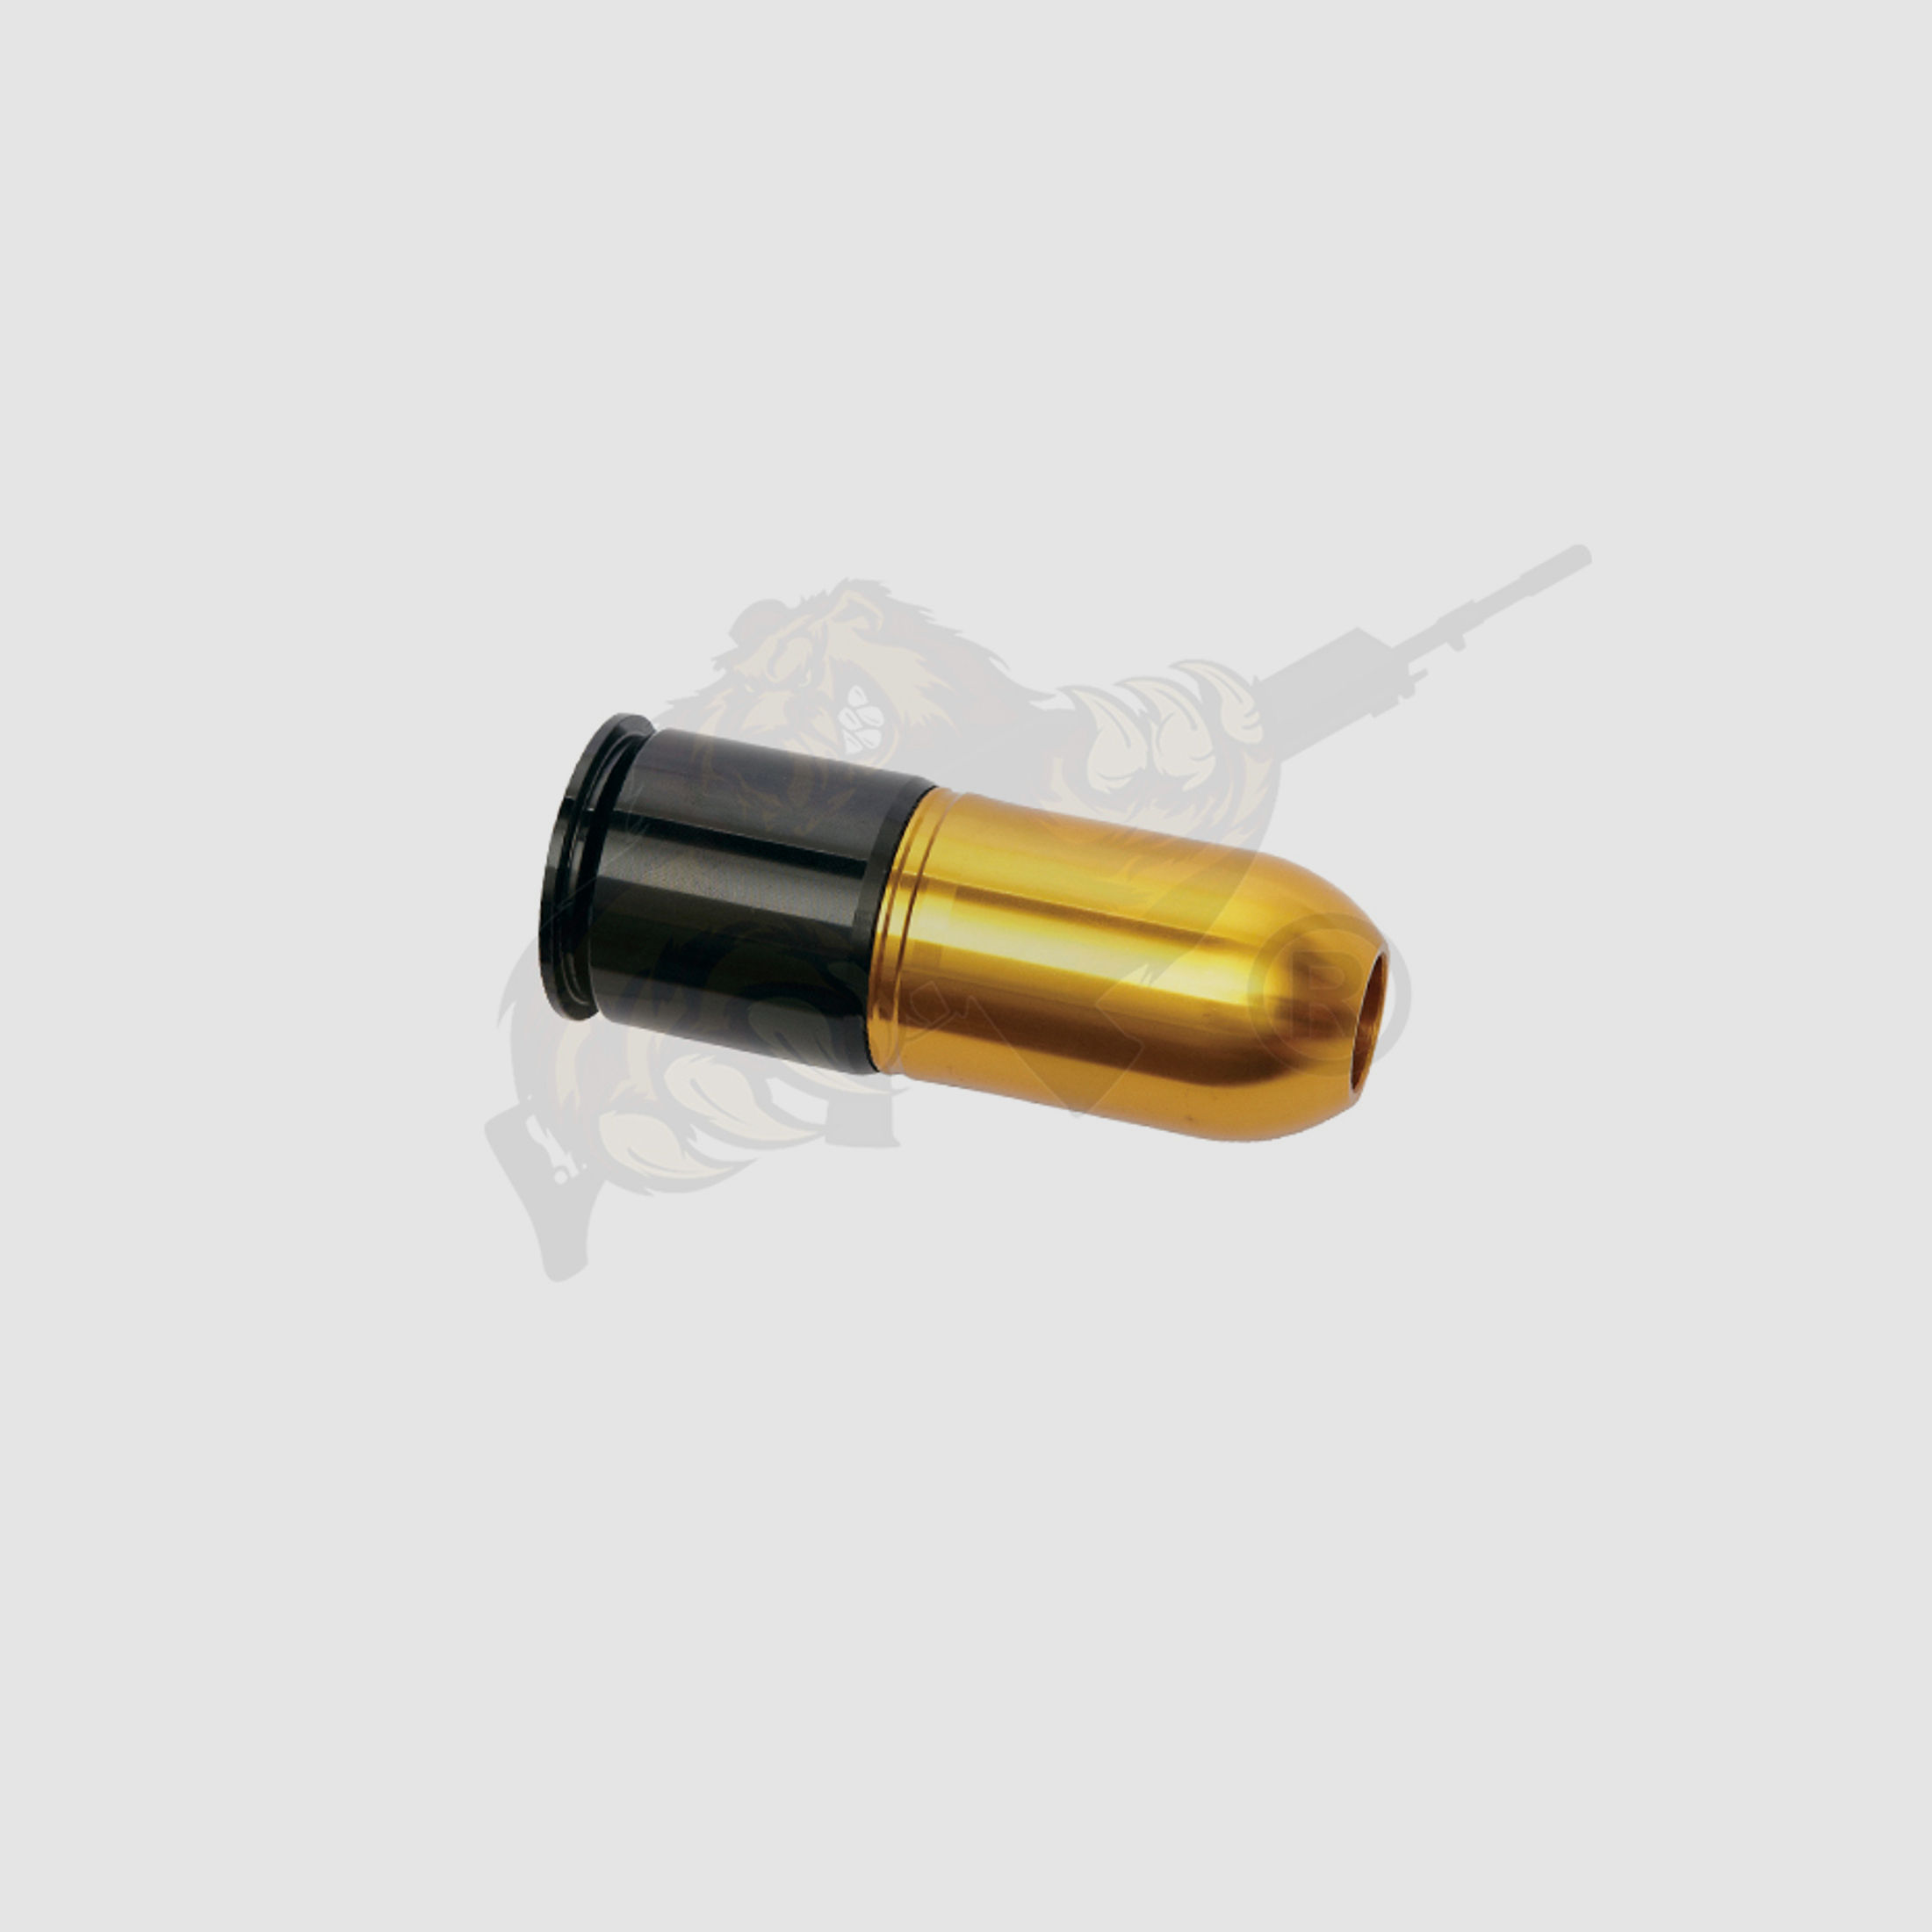 40mm BB-Shower Long Airsoft Granate black/copper - 80 rds 6mm